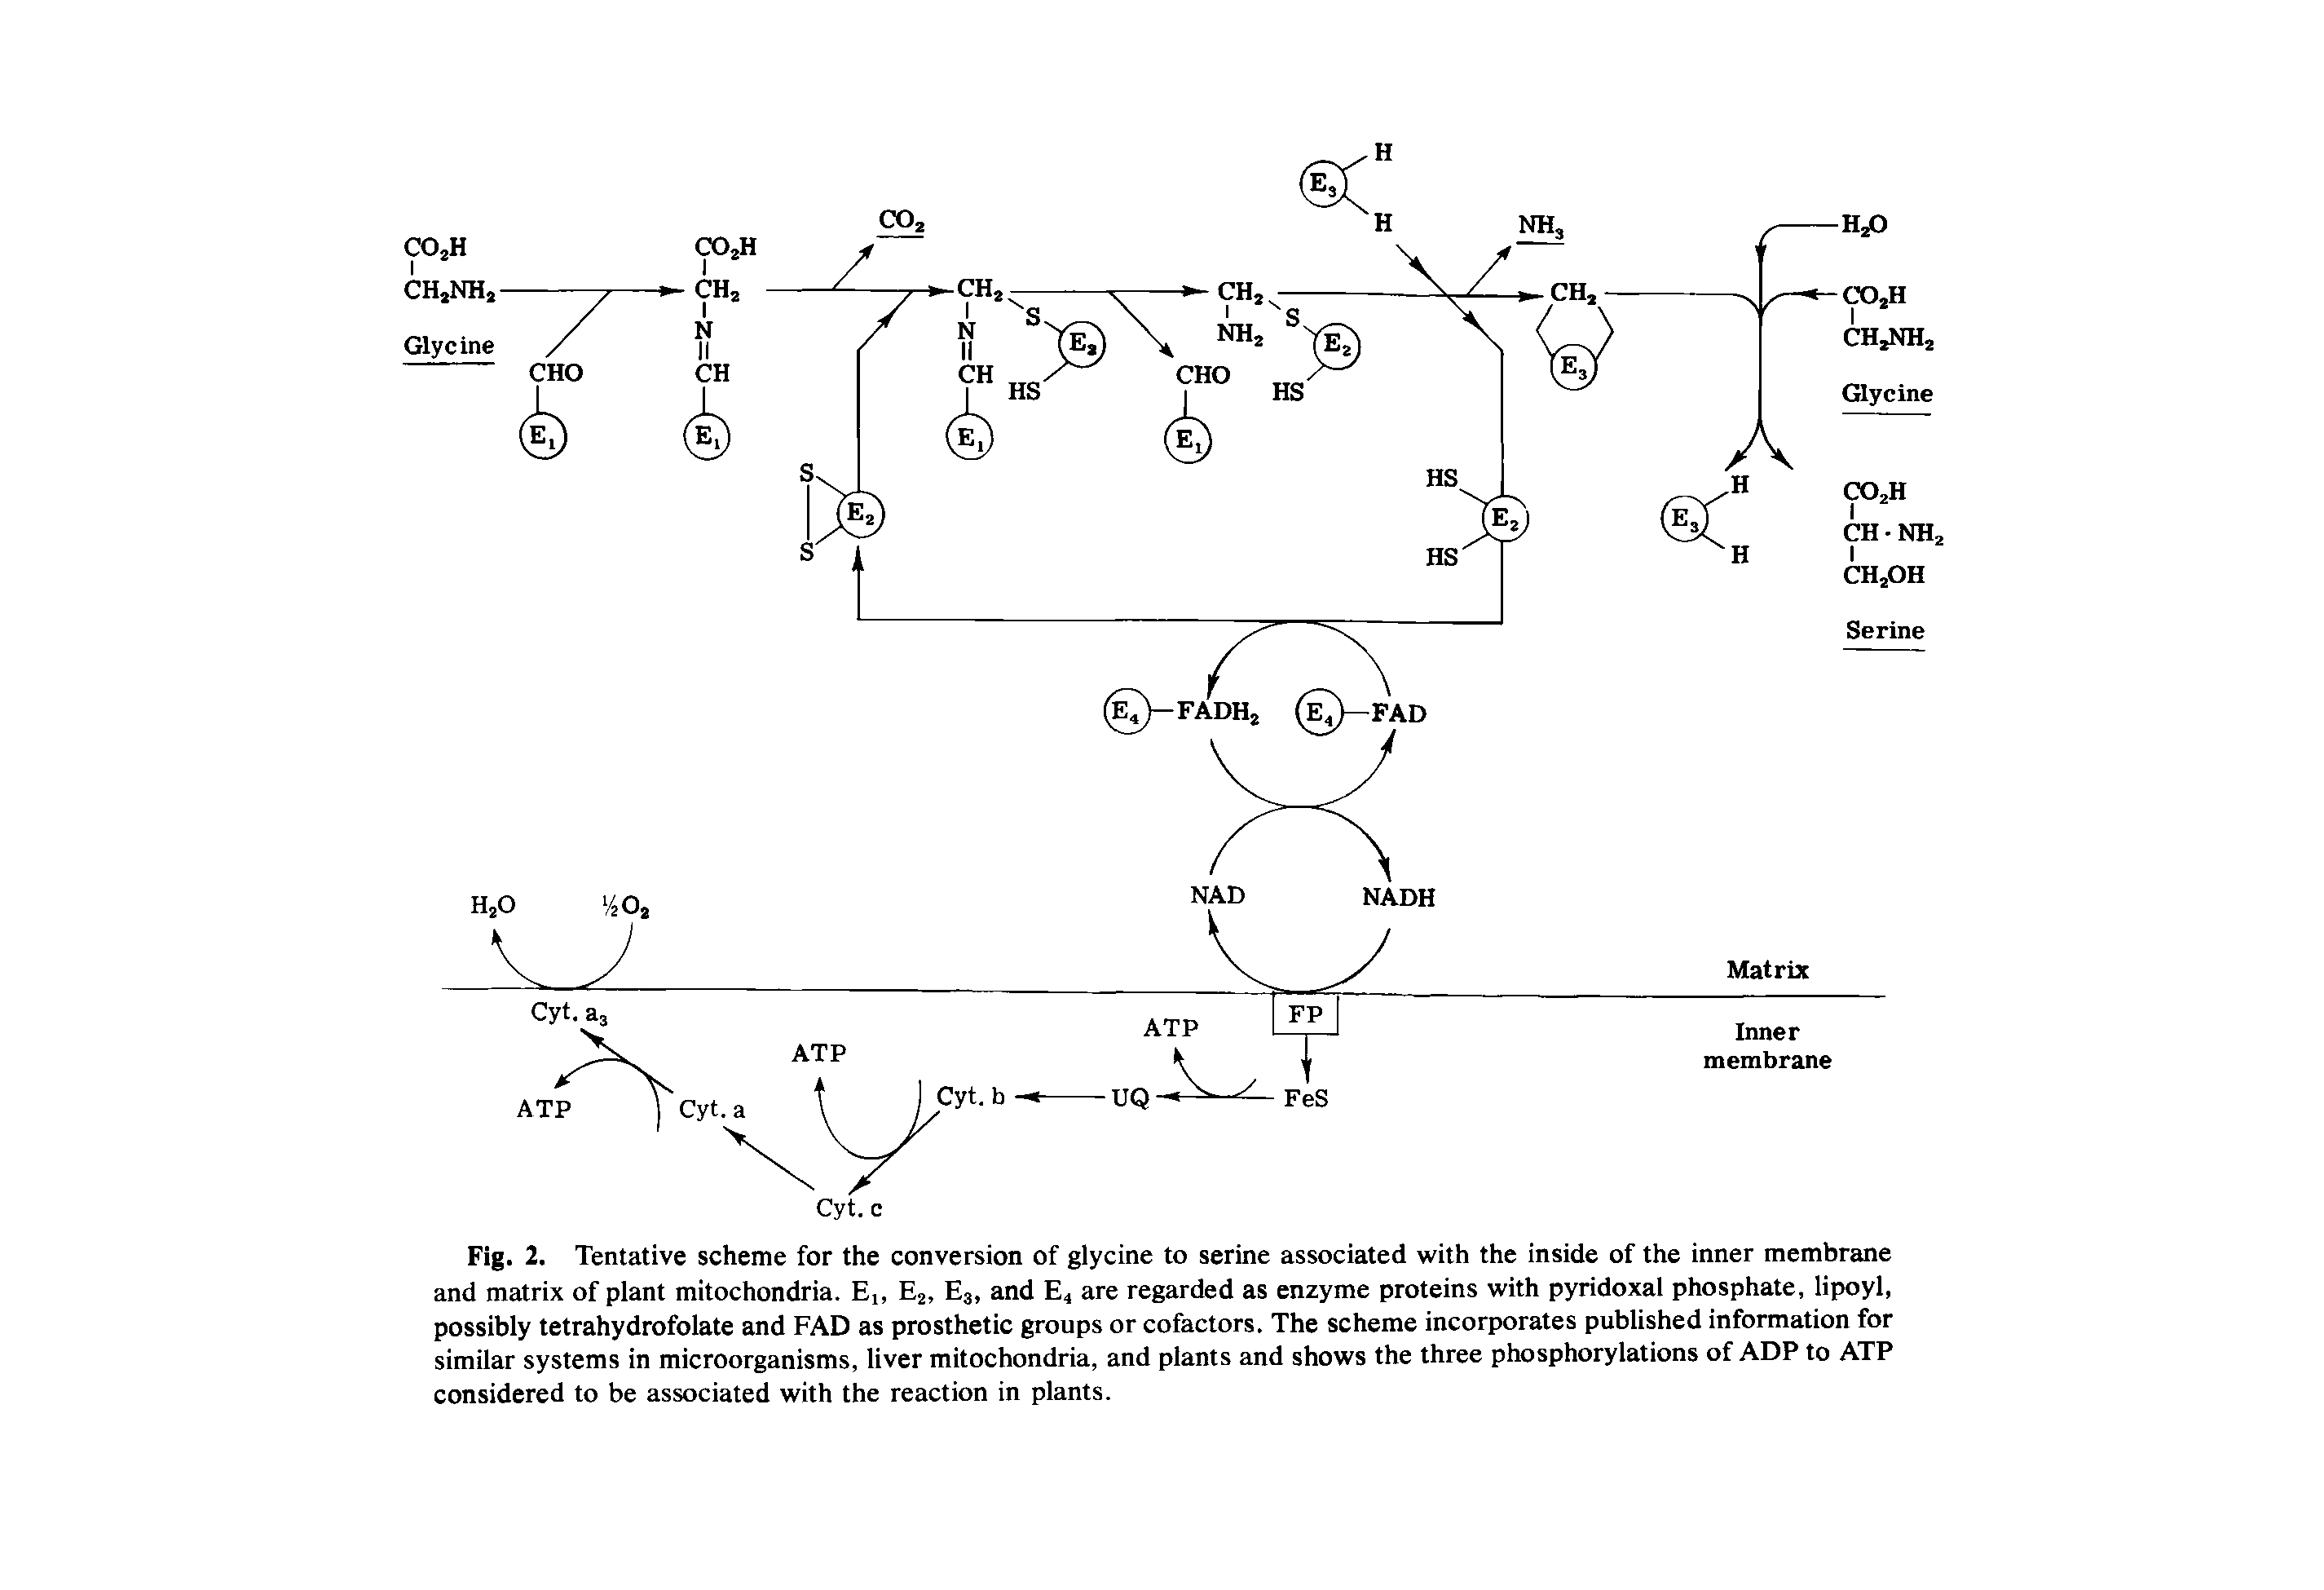 Fig. 2. Tentative scheme for the conversion of glycine to serine associated with the inside of the inner membrane and matrix of plant mitochondria. E, Ej, E3, and E4 are regarded as enzyme proteins with pyridoxal phosphate, lipoyl, possibly tetrahydrofolate and FAD as prosthetic groups or cofactors. The scheme incorporates published information for similar systems in microorganisms, liver mitochondria, and plants and shows the three phosphorylations of ADP to ATP considered to be associated with the reaction in plants.